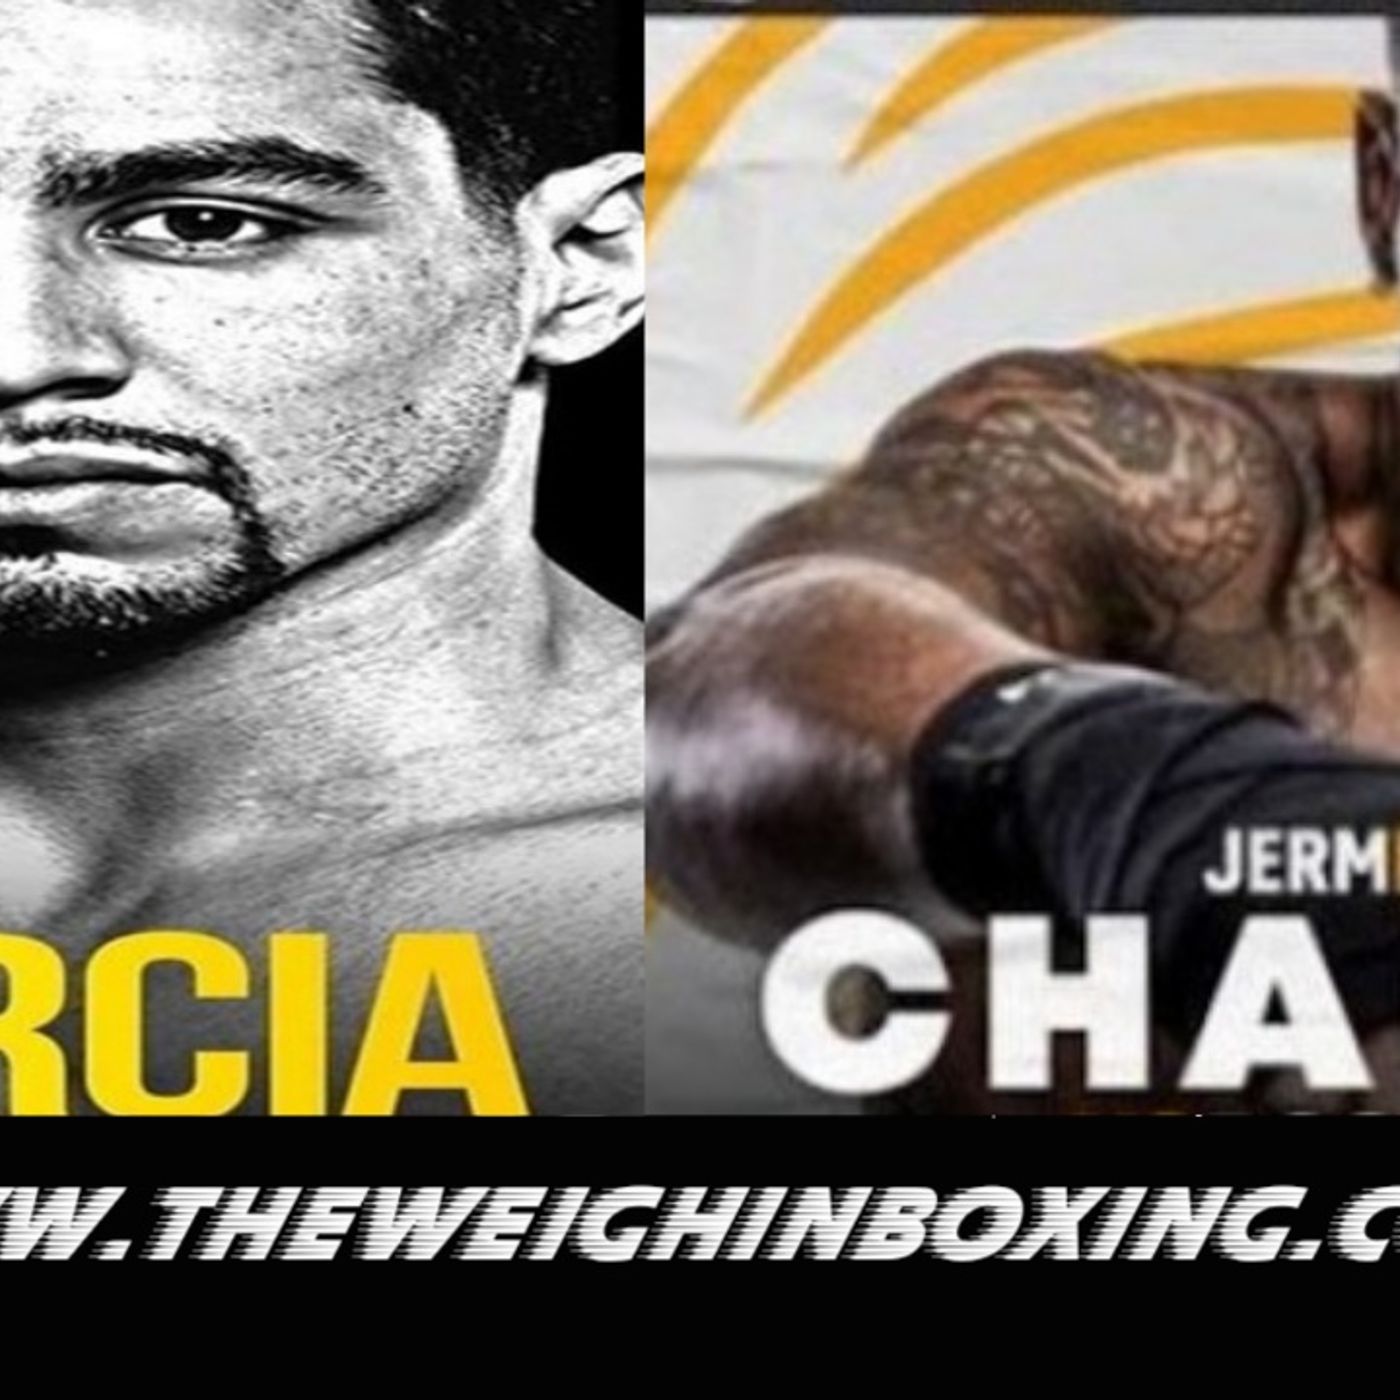 Jermell Charlo vs Danny Garcia for all the straps at 154!